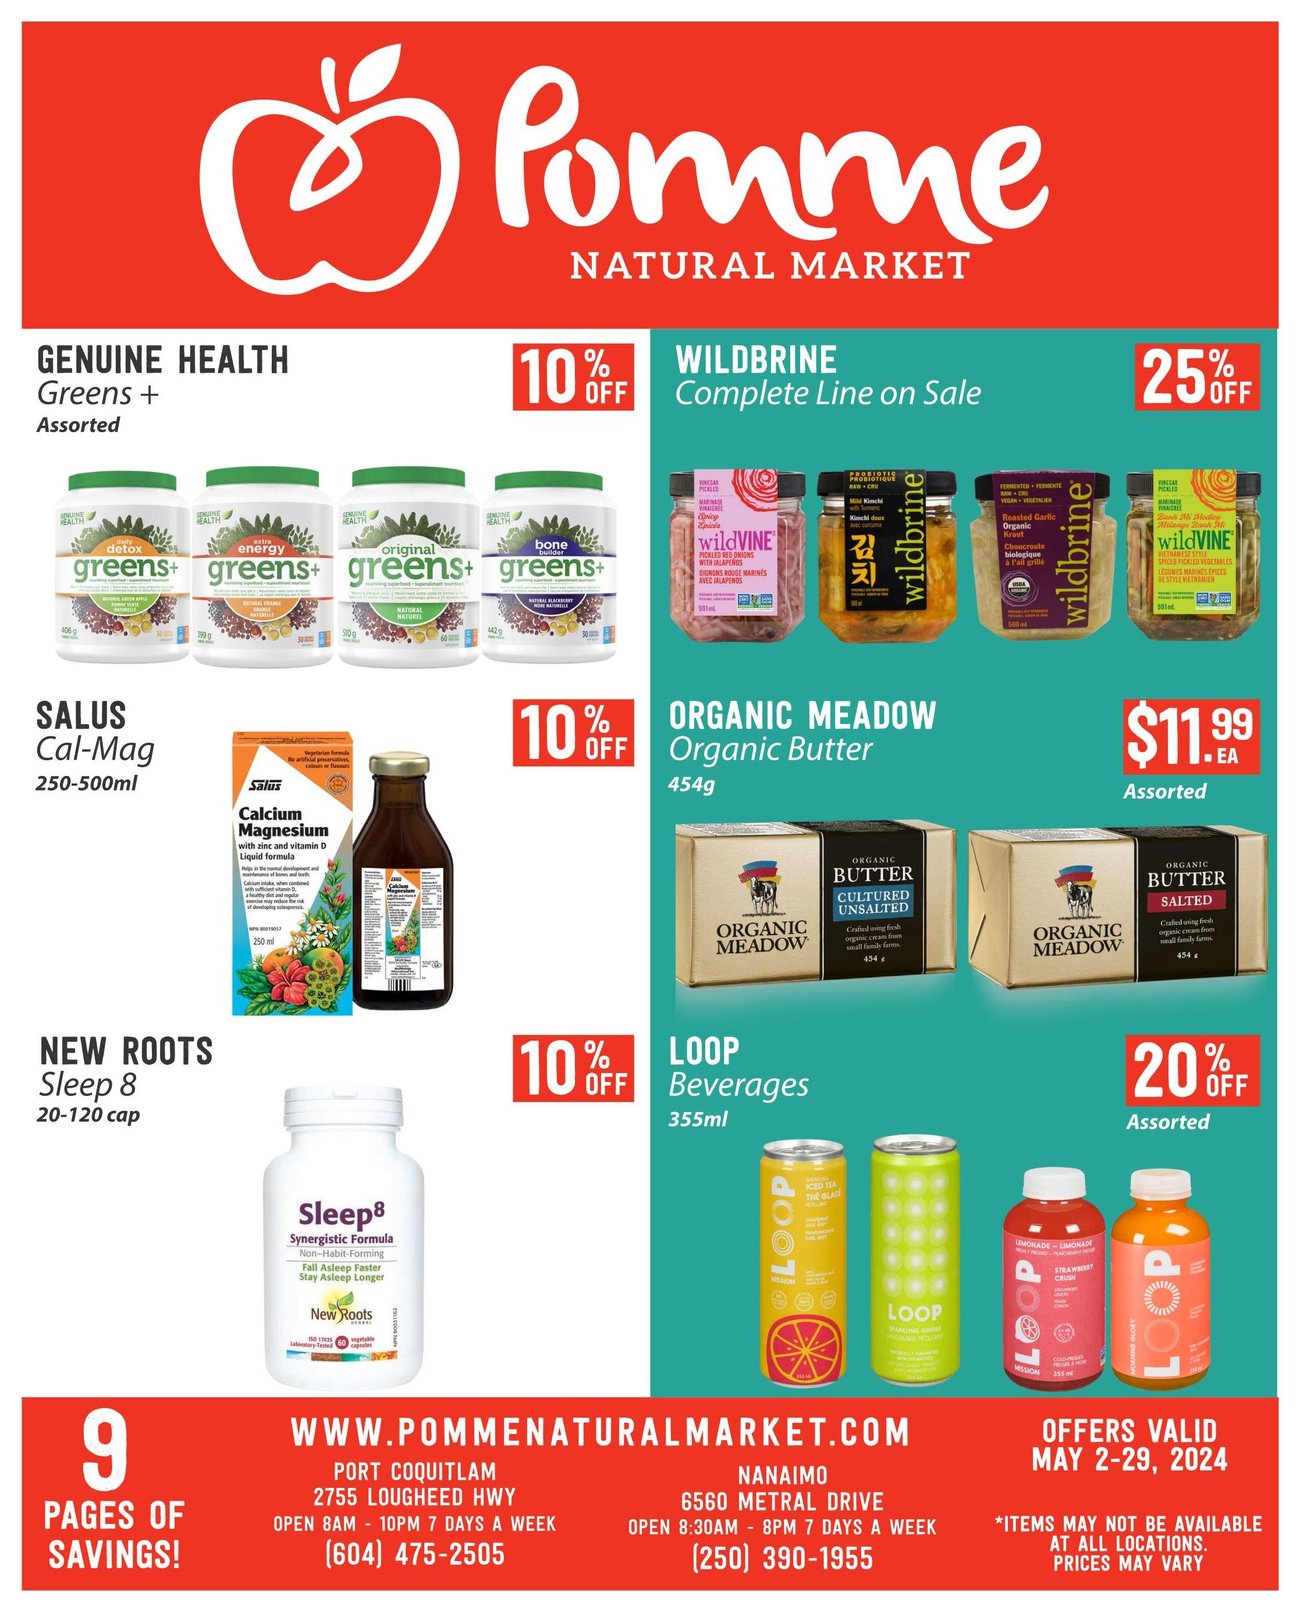 Pomme Natural Market - Monthly Savings - Page 1